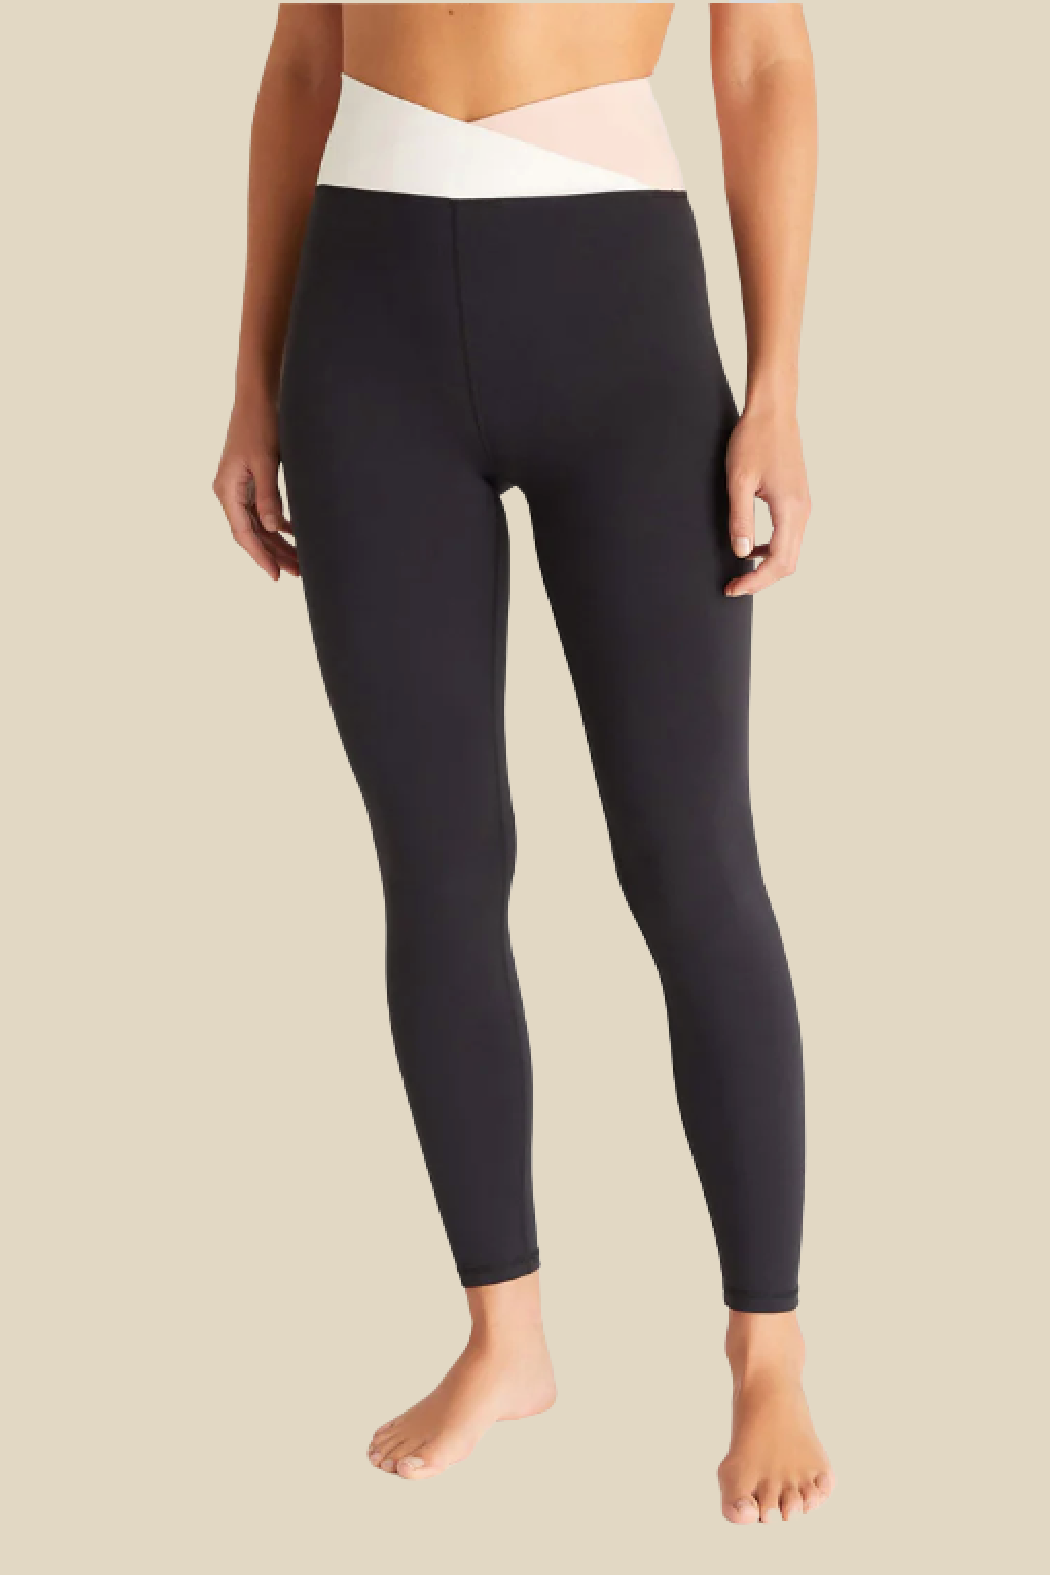 Aerie Move Color Block High Waisted 7/8 Legging